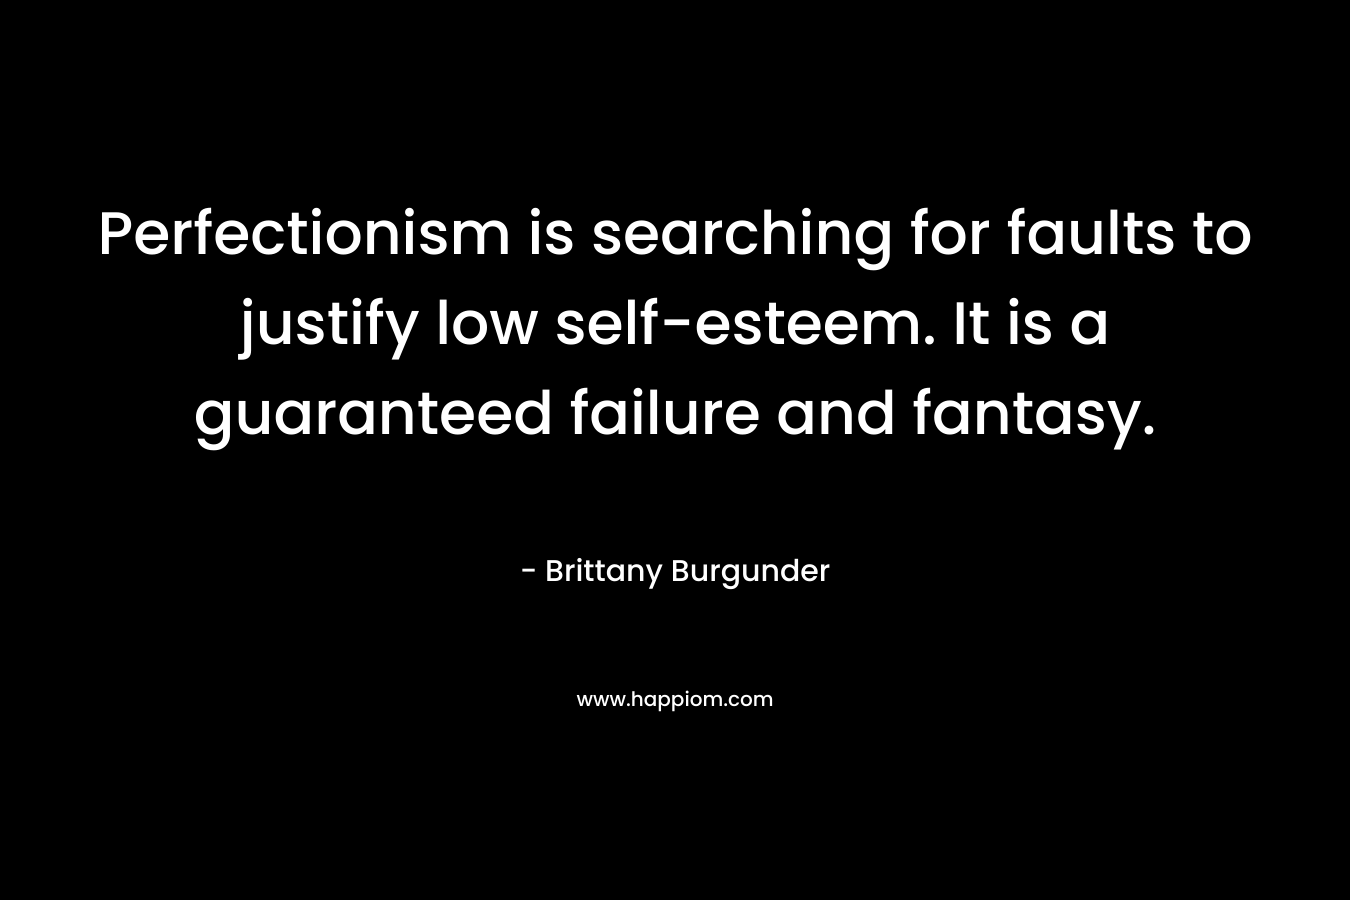 Perfectionism is searching for faults to justify low self-esteem. It is a guaranteed failure and fantasy.